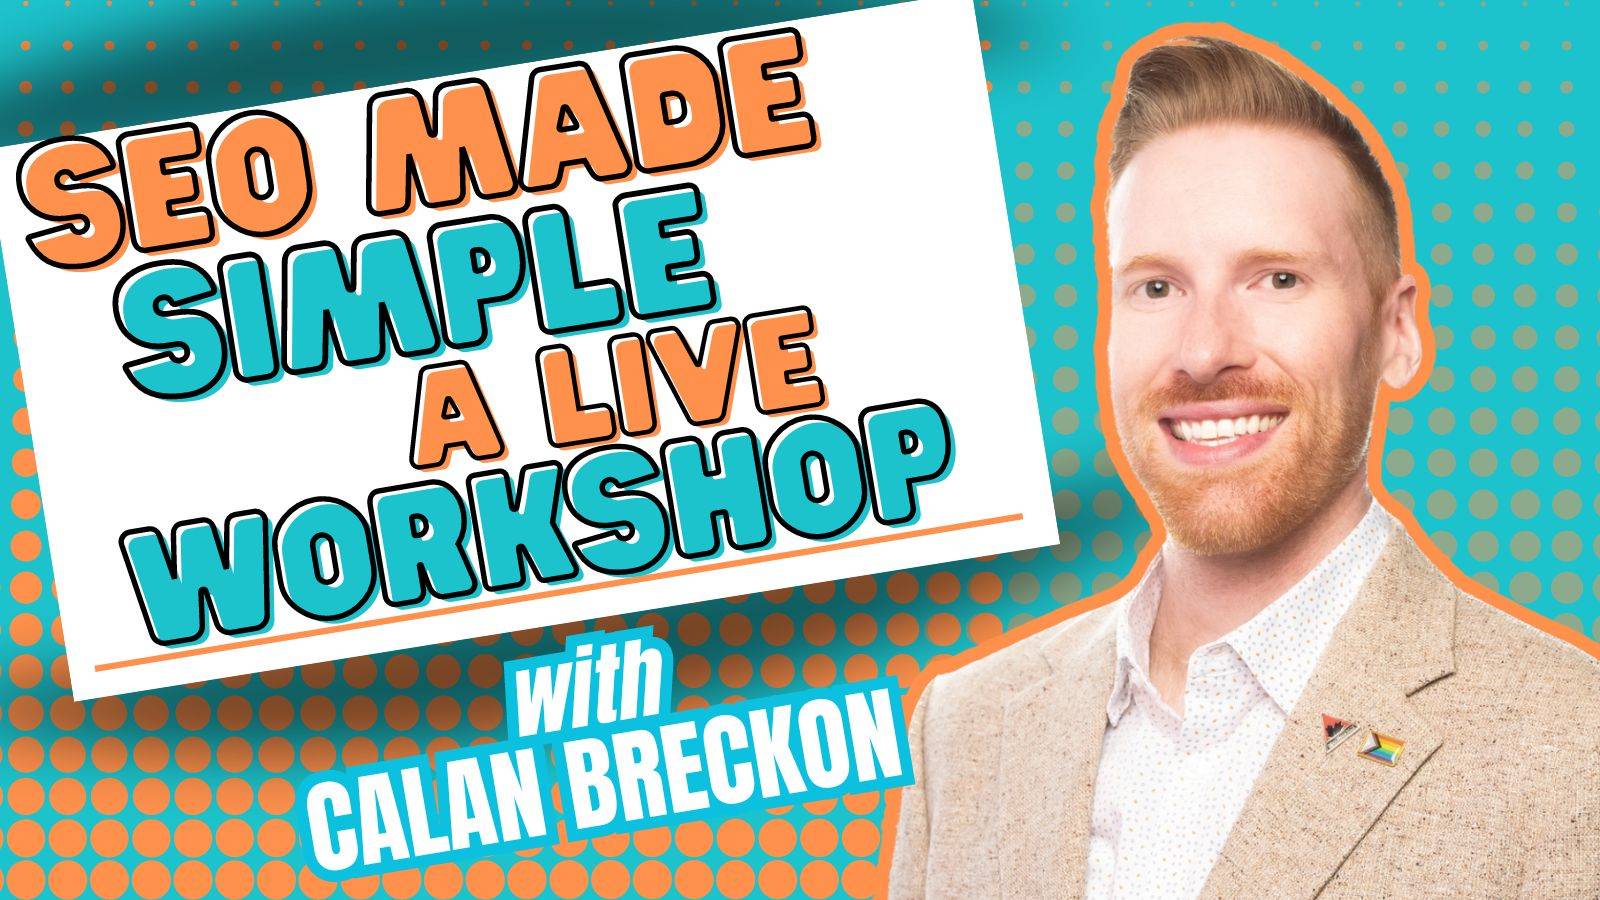 SEO Made Simple - A Live Workshop with Calan Breckon